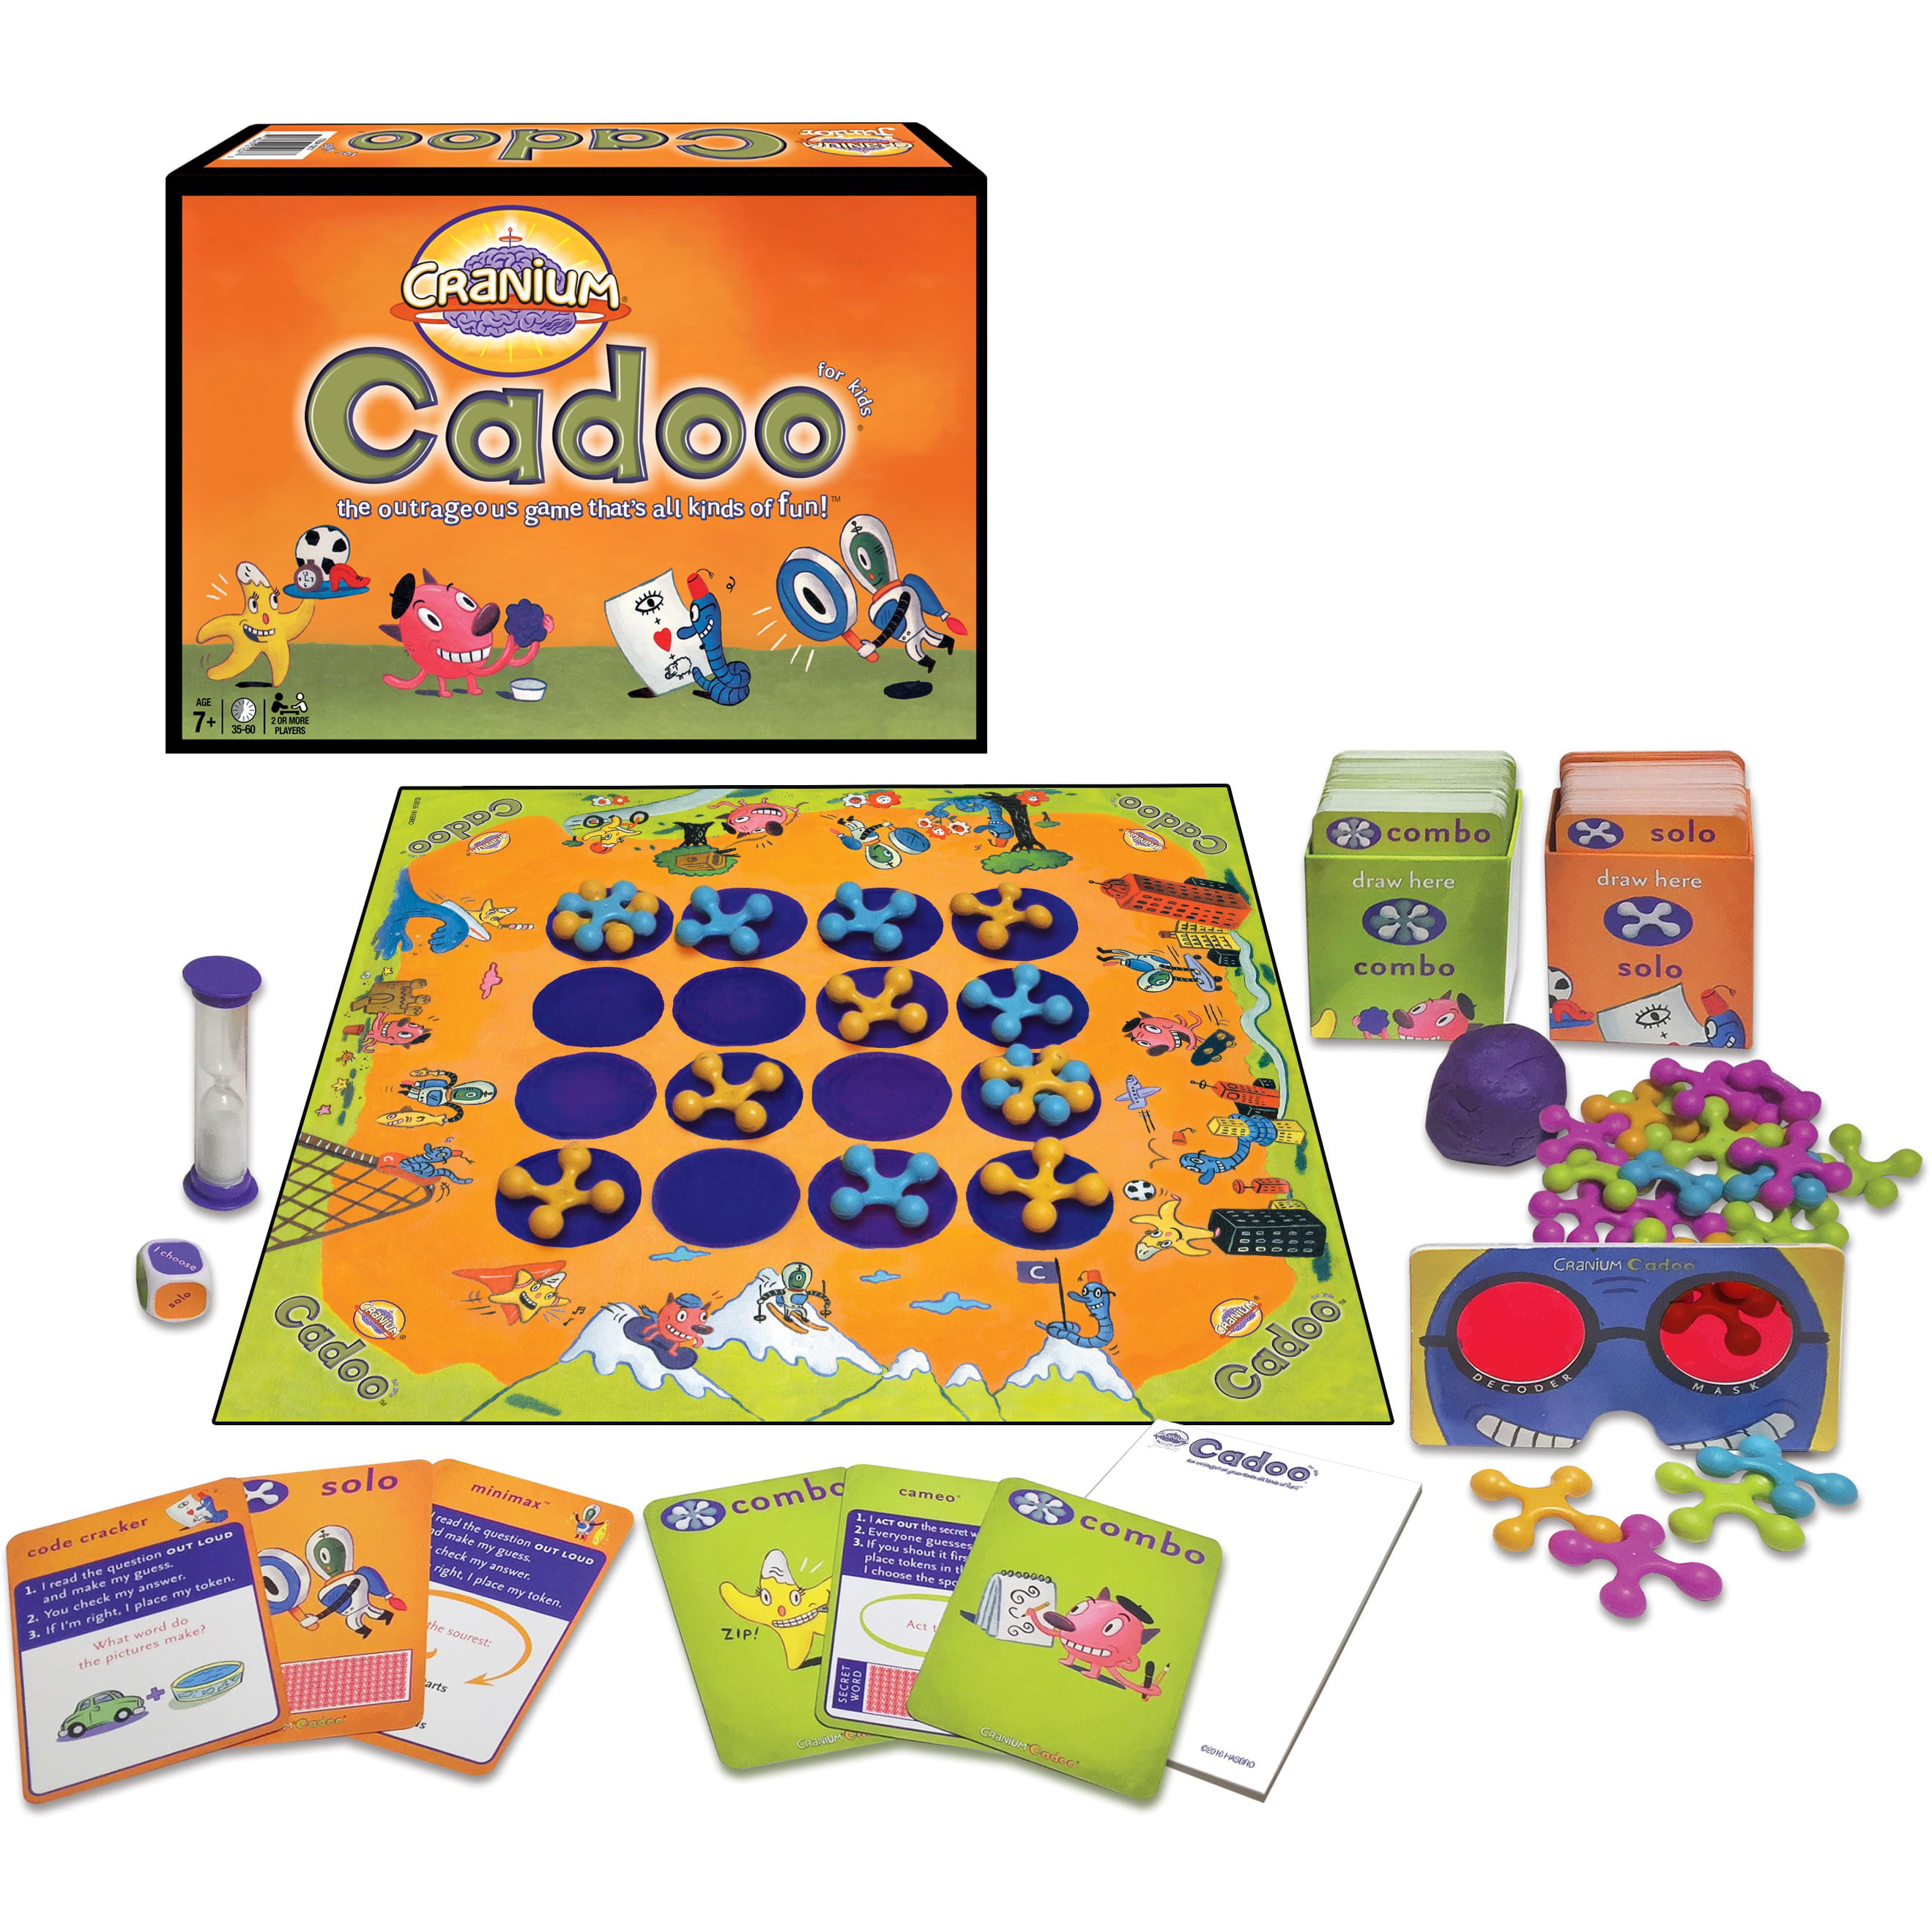 All Replacement Spare Parts Save an additional 30% Details about   Cranium Cadoo Game For KIDS 